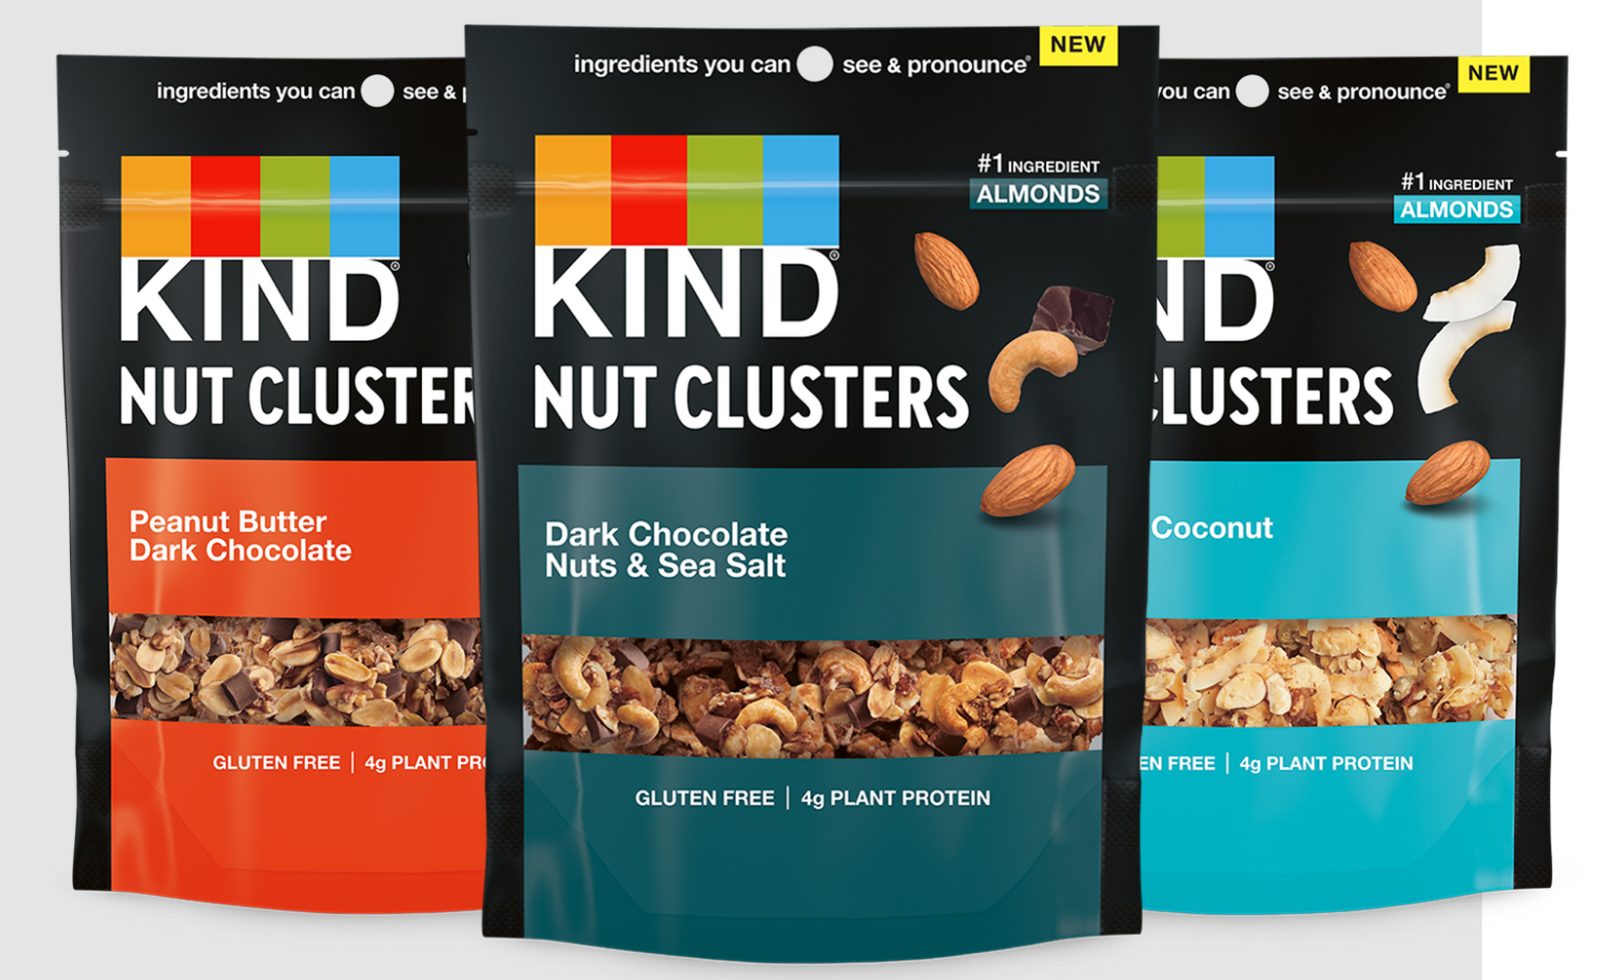 Oh YEAH! This Kind Nut Clusters Deal At Walmart Is TOTALLY FREE! 